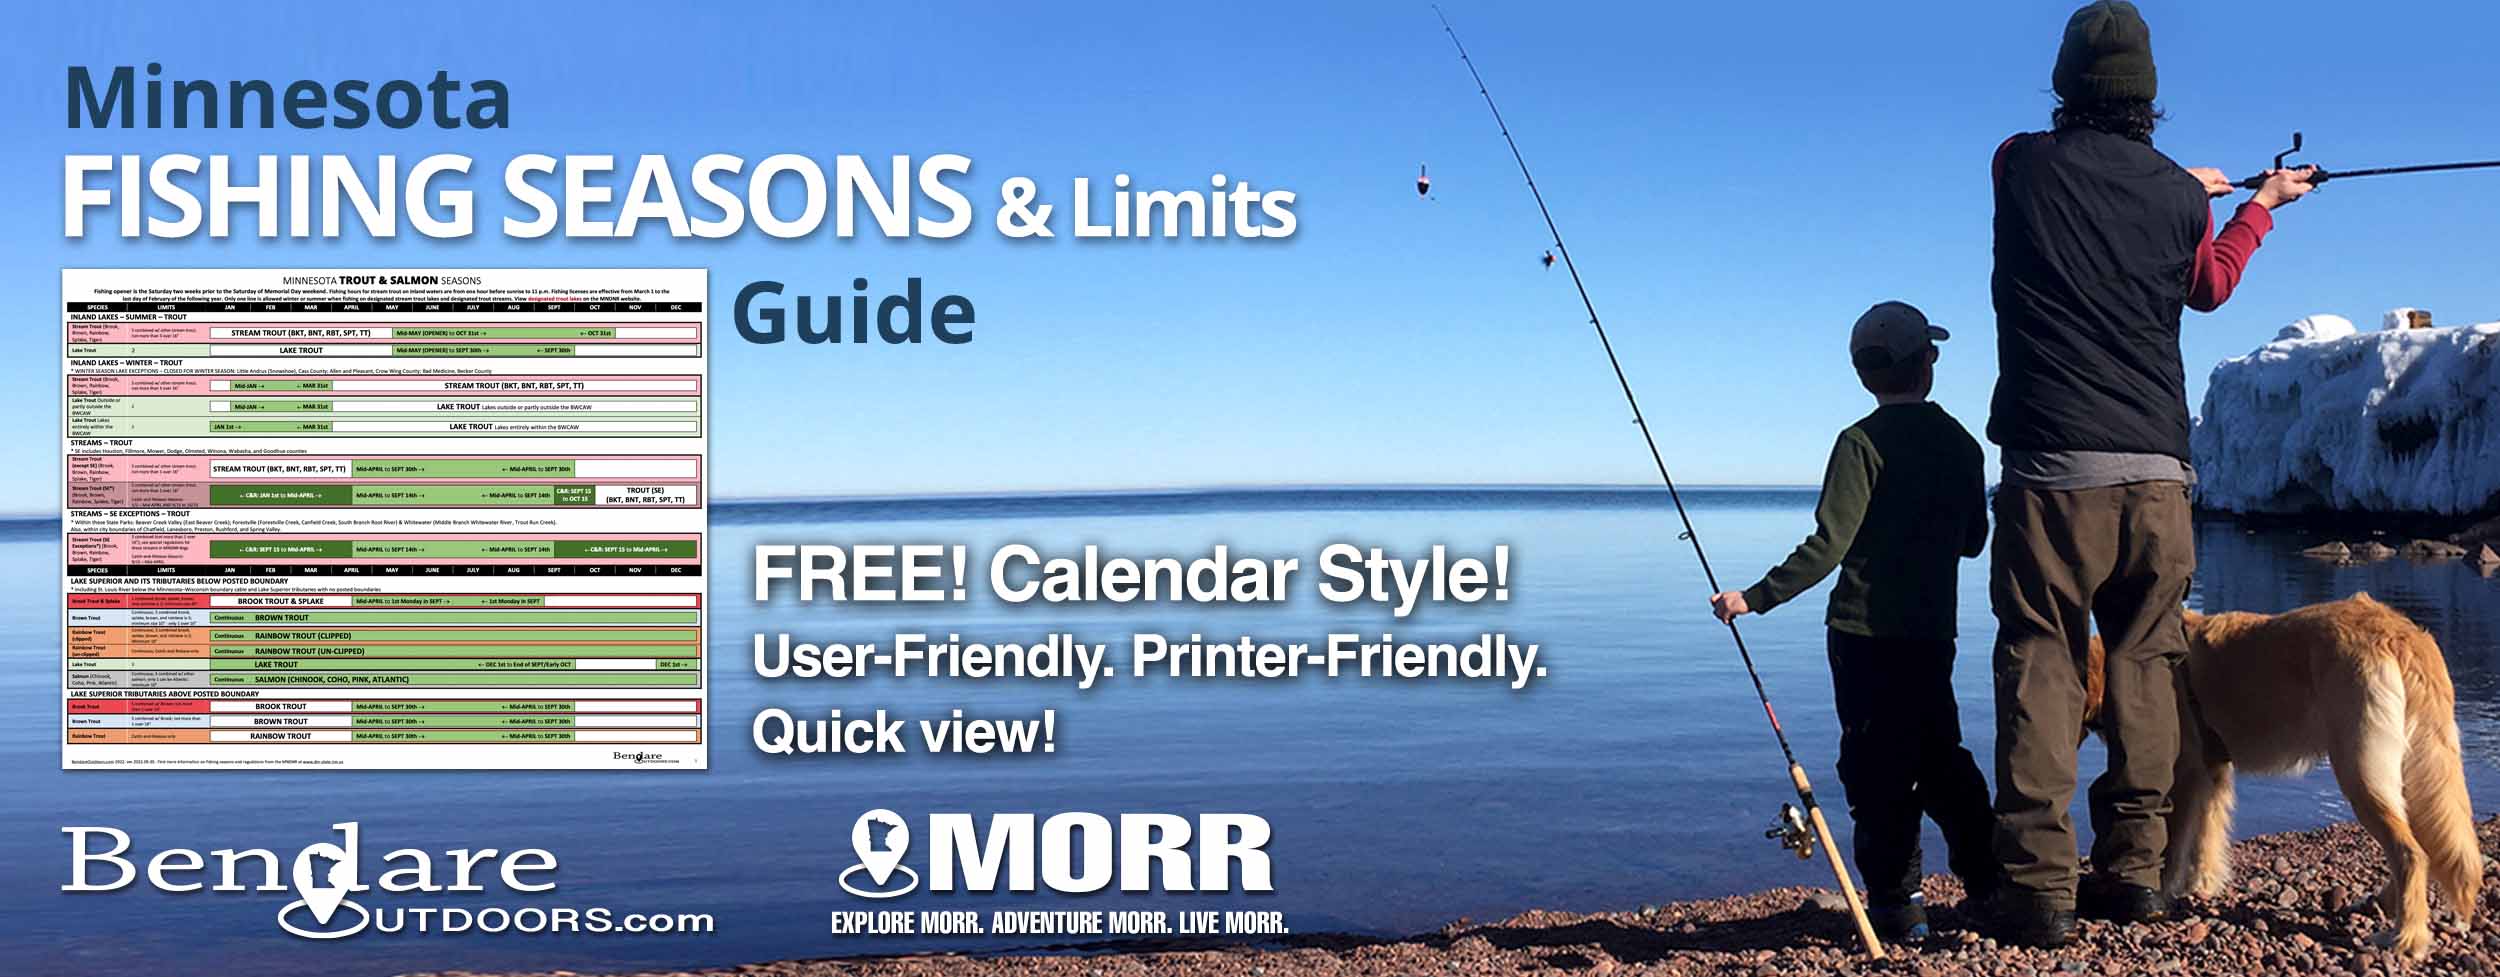 Minnesota Fishing Seasons and Limits Guide by Bendare Outdoors